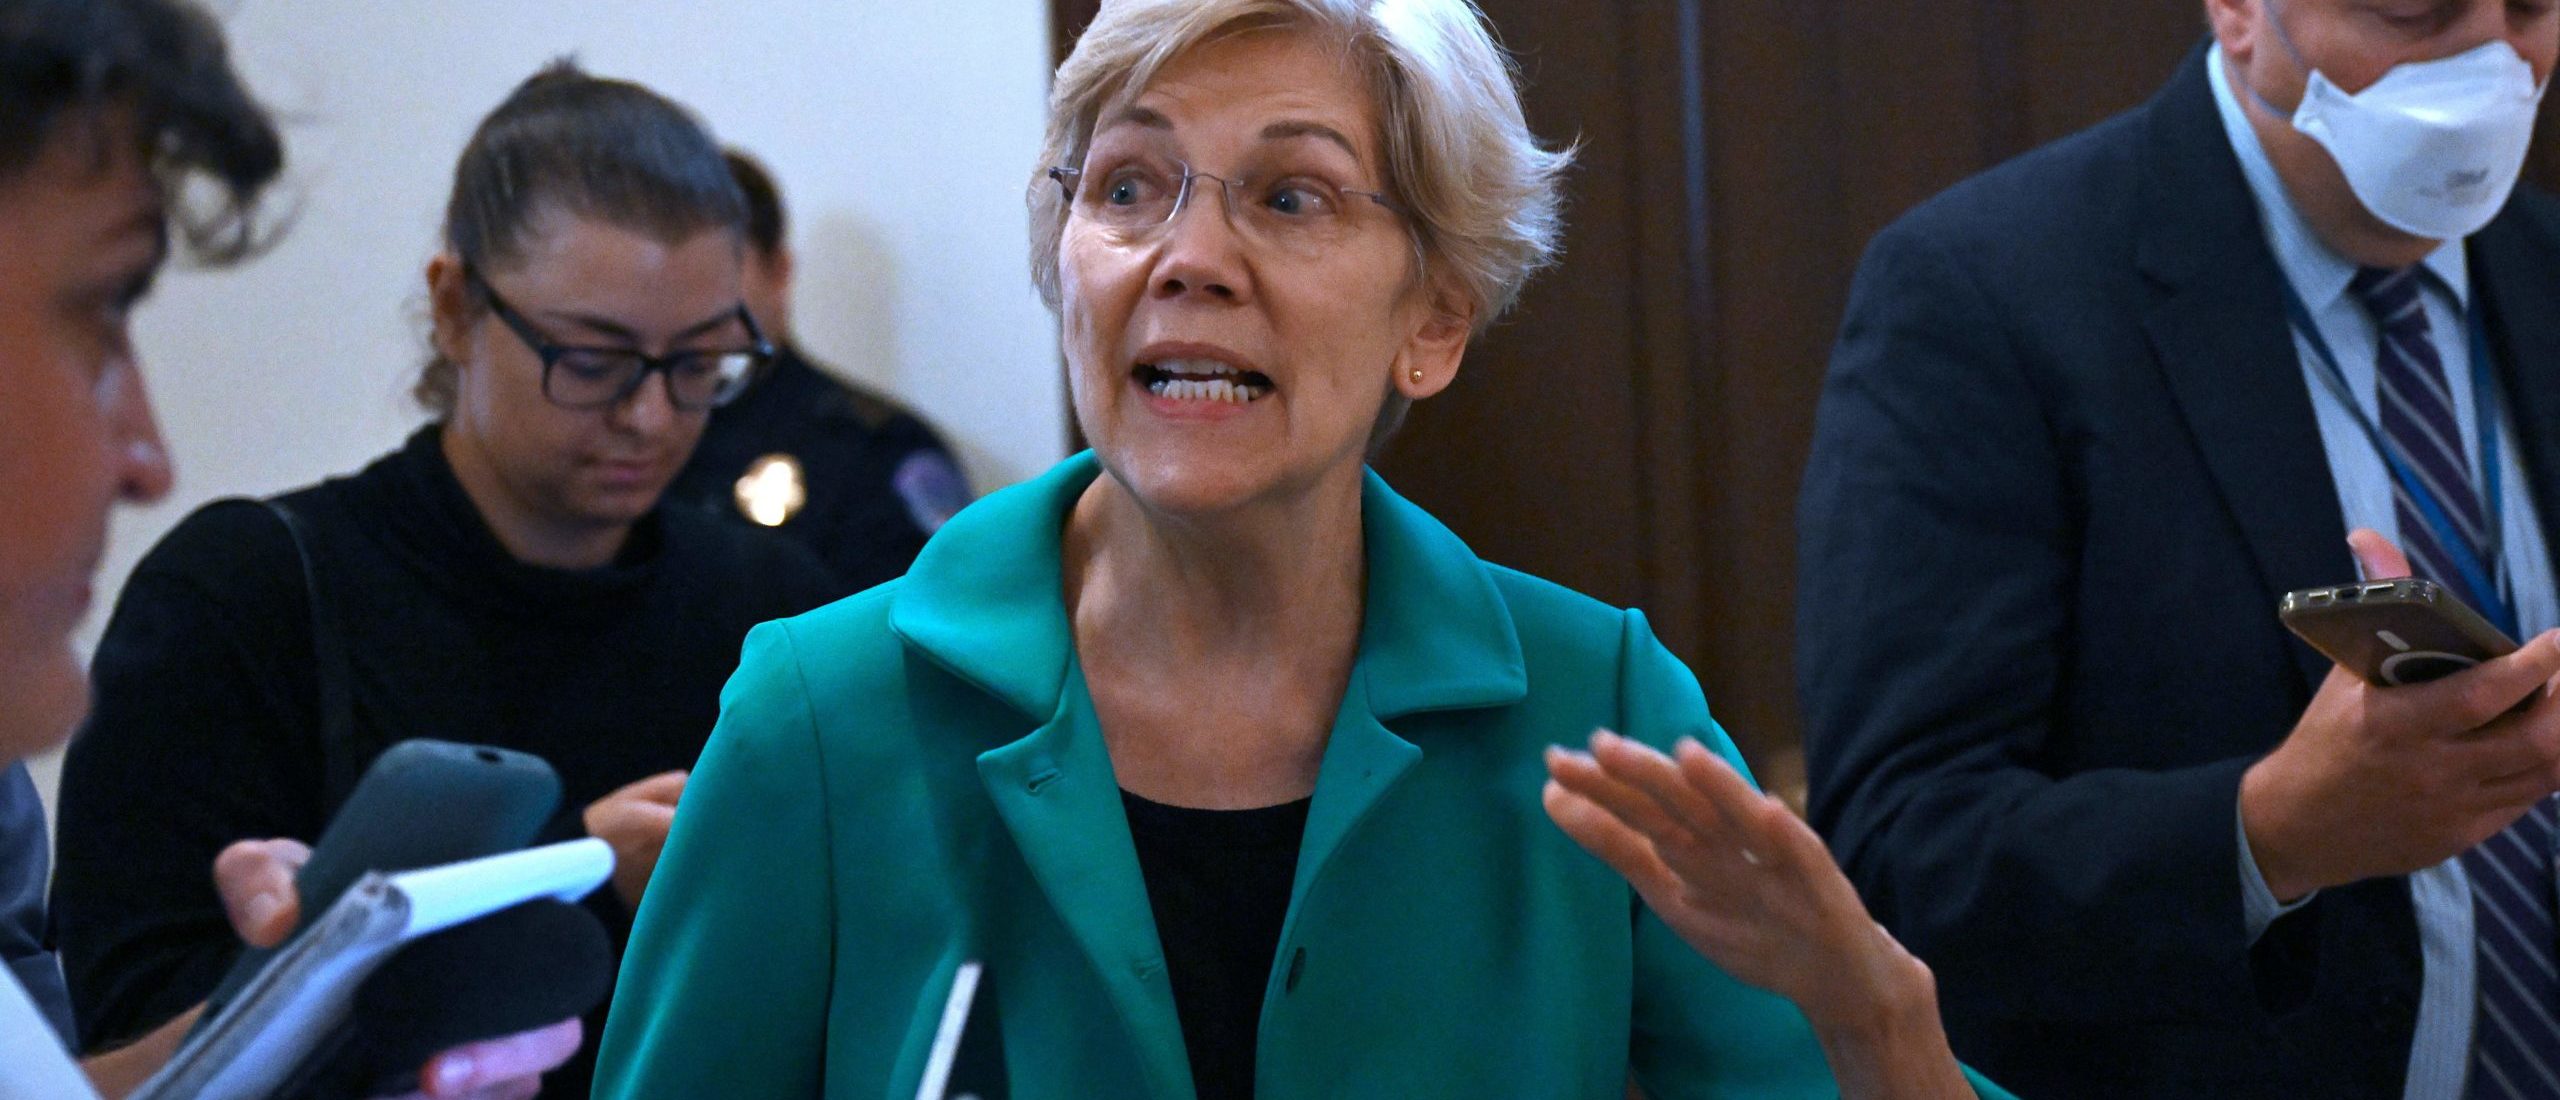 US Democratic Senator from Massachusetts Elizabeth Warren speaks to reporters after she left a US Senate bipartisan Artificial Intelligence (AI) Insight Forum hearing at the US Capitol in Washington, DC, on September 13, 2023. (Photo by ANDREW CABALLERO-REYNOLDS / AFP)